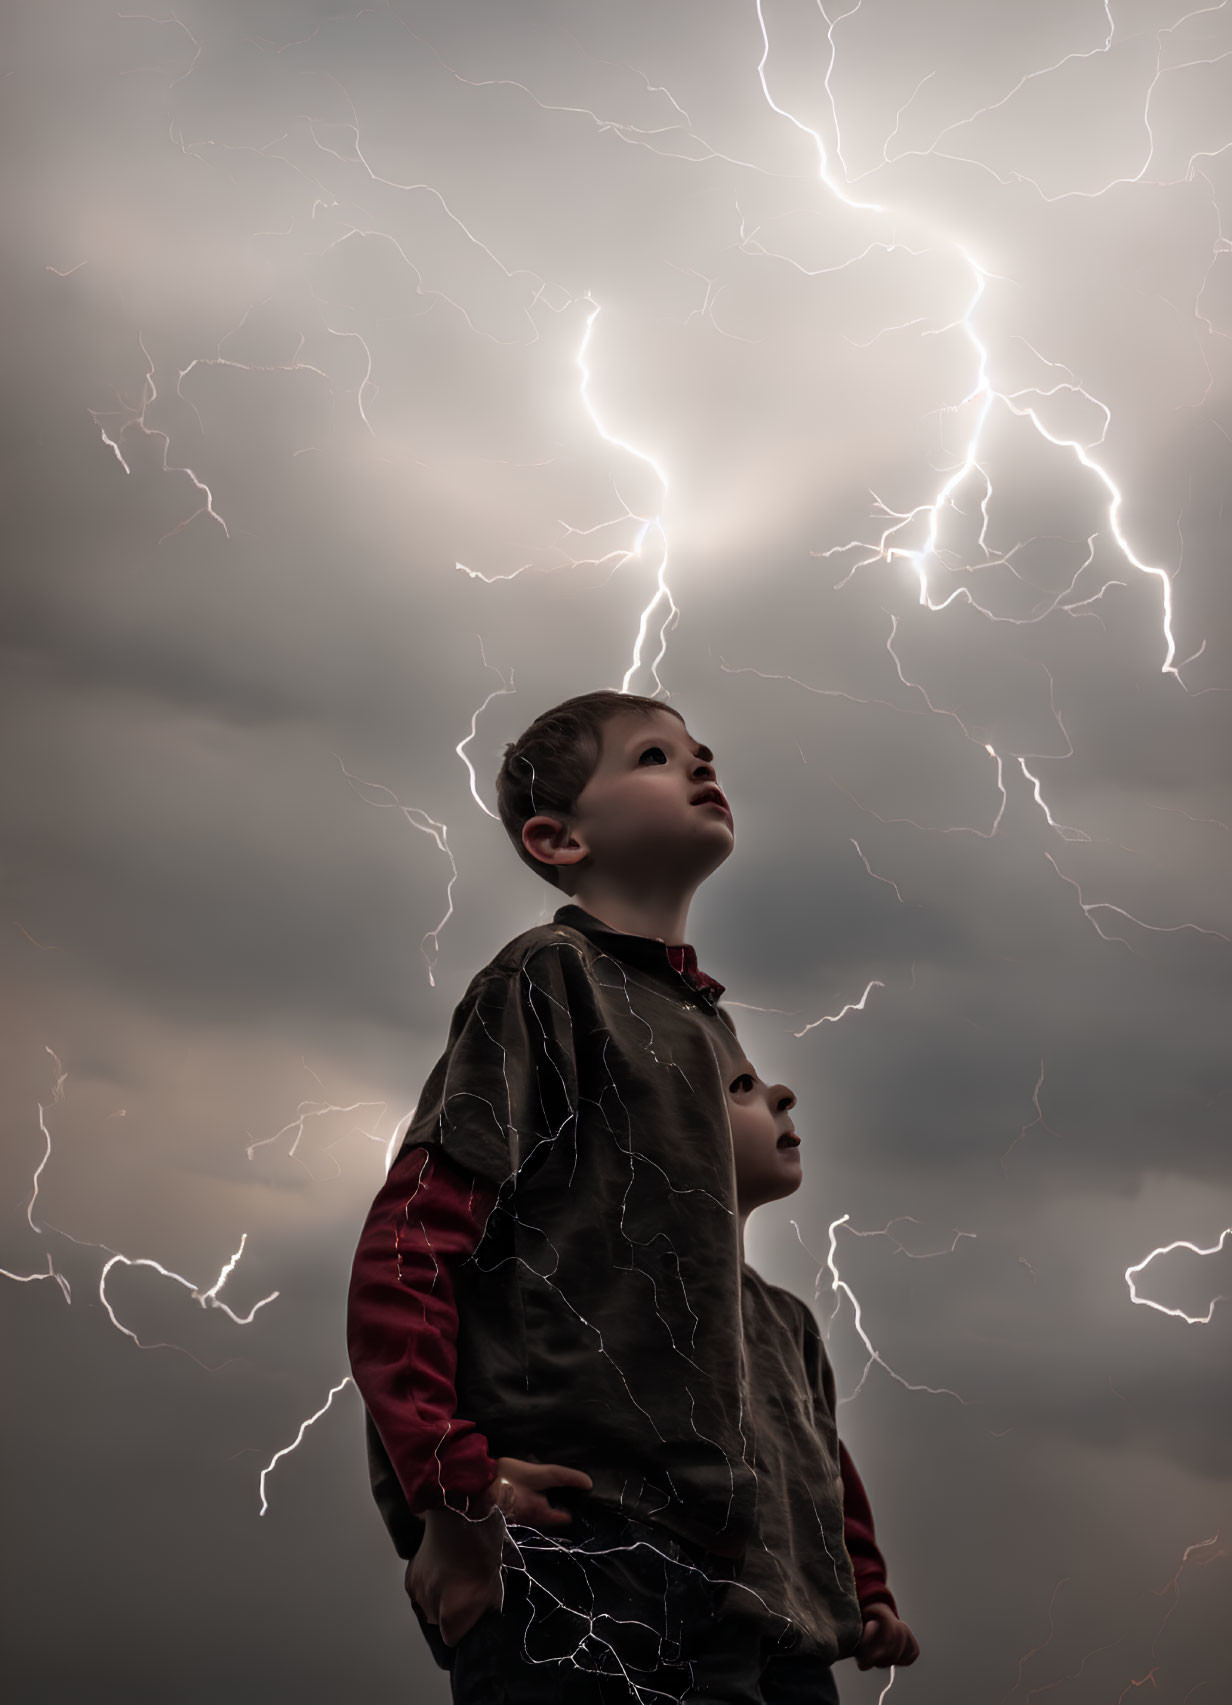 Child gazes at dramatic sky with forking lightning